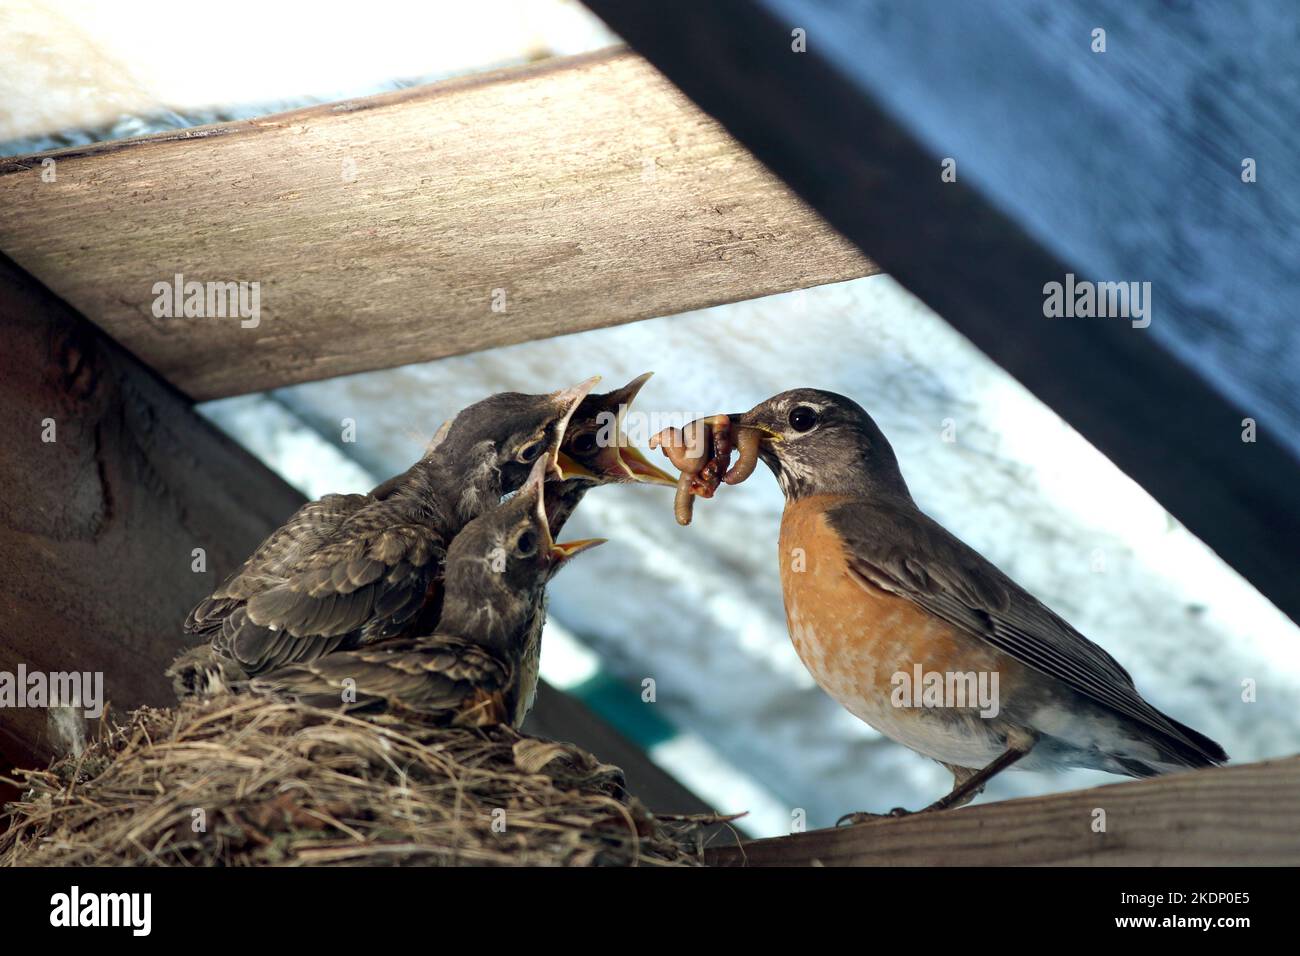 An adult American Robin brings a beak full of juicy worms to three hungry fledglings in the nest. Stock Photo